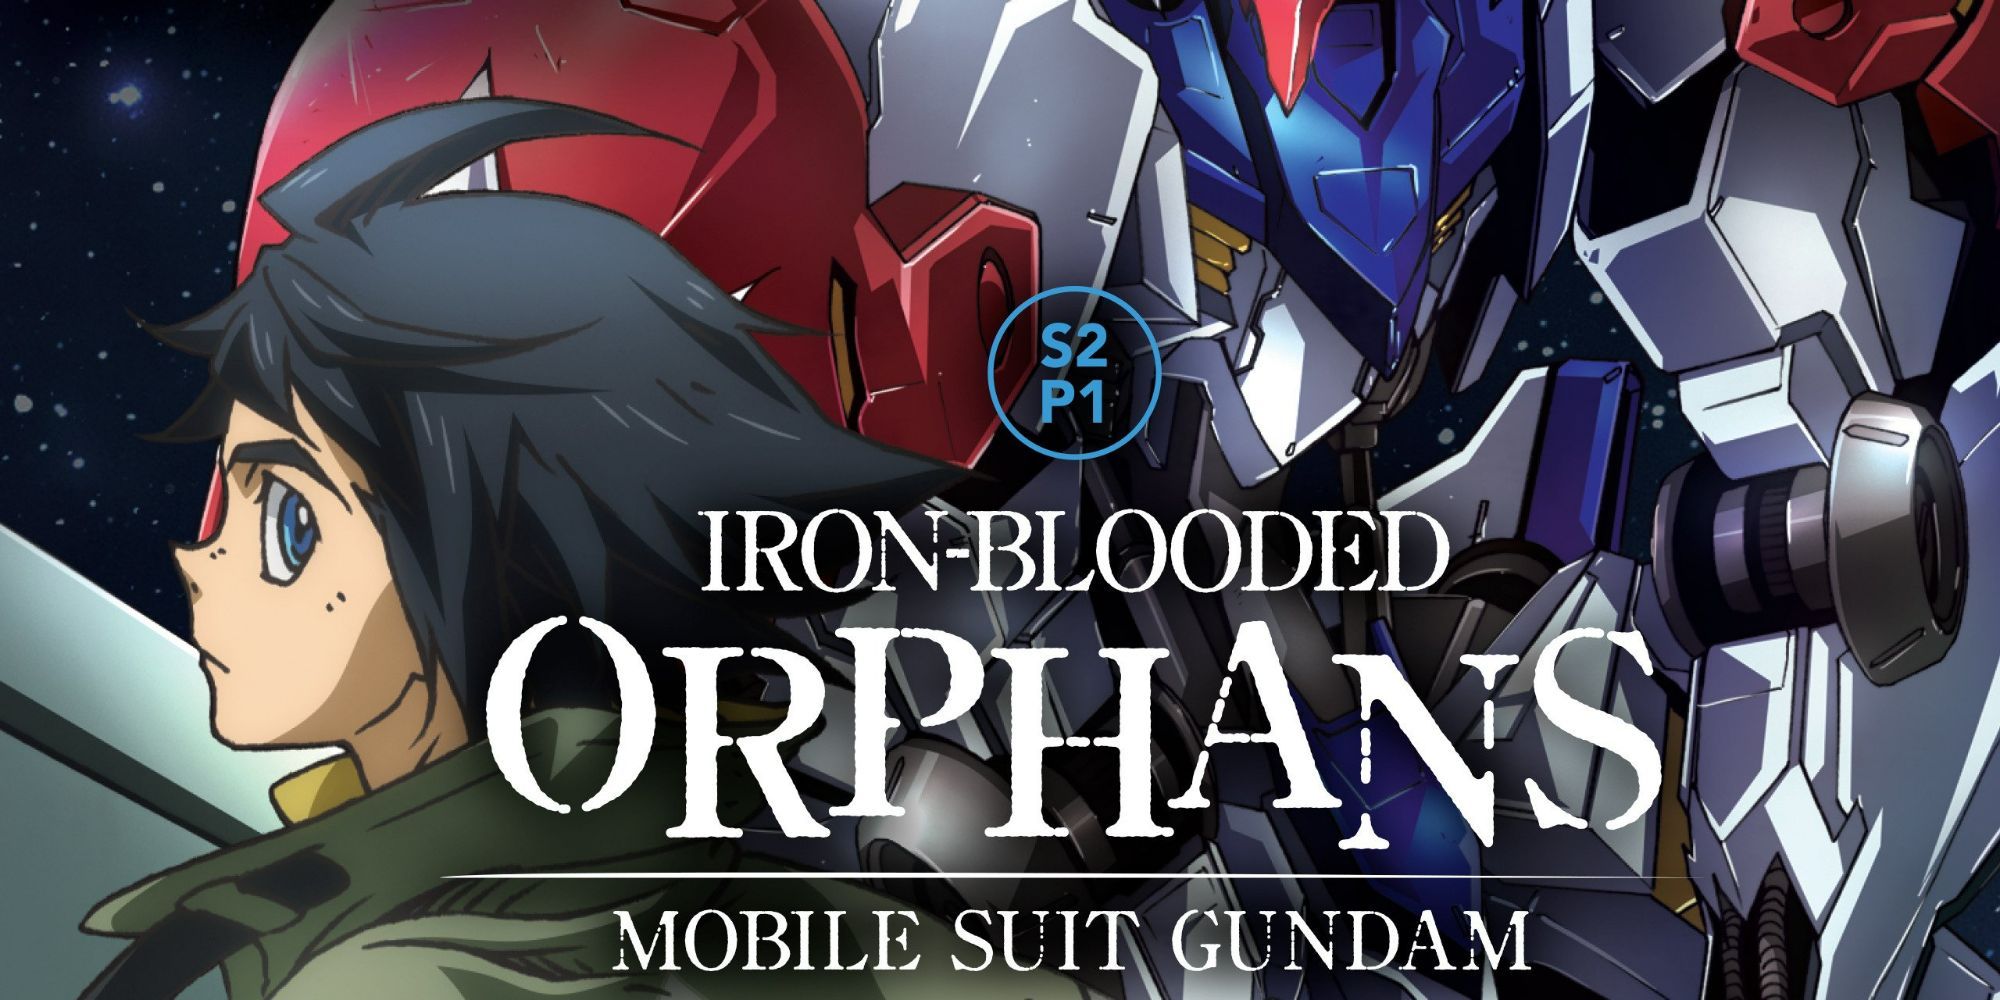 Title card for Mobile Suit Gundam: Iron-Blooded Orphans